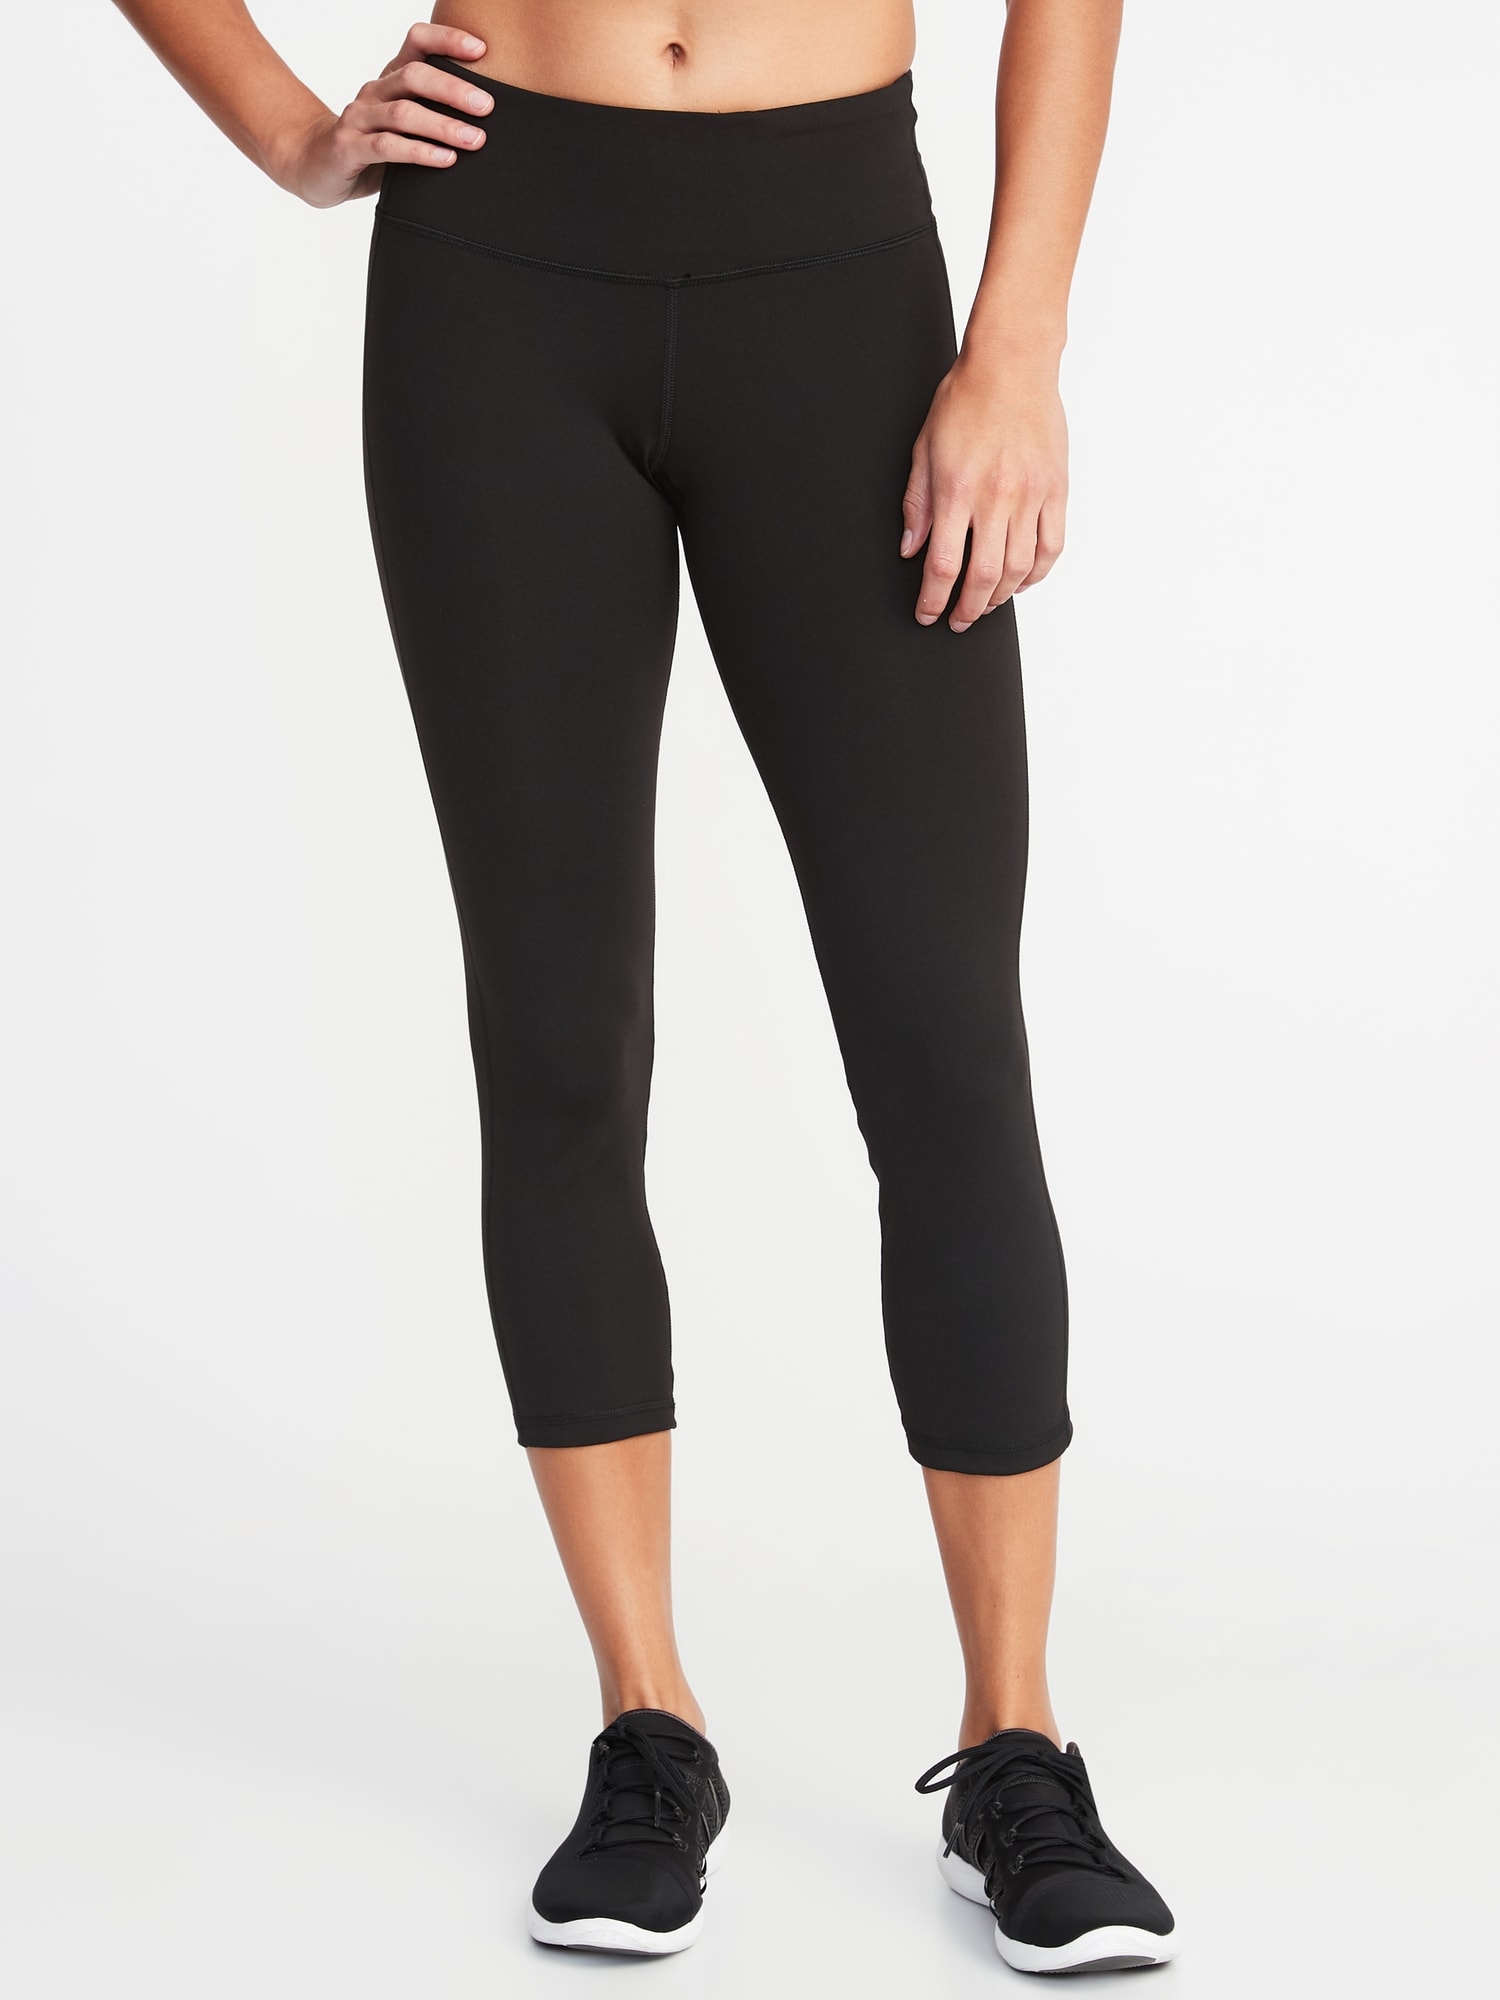 old navy active go dry yoga pants